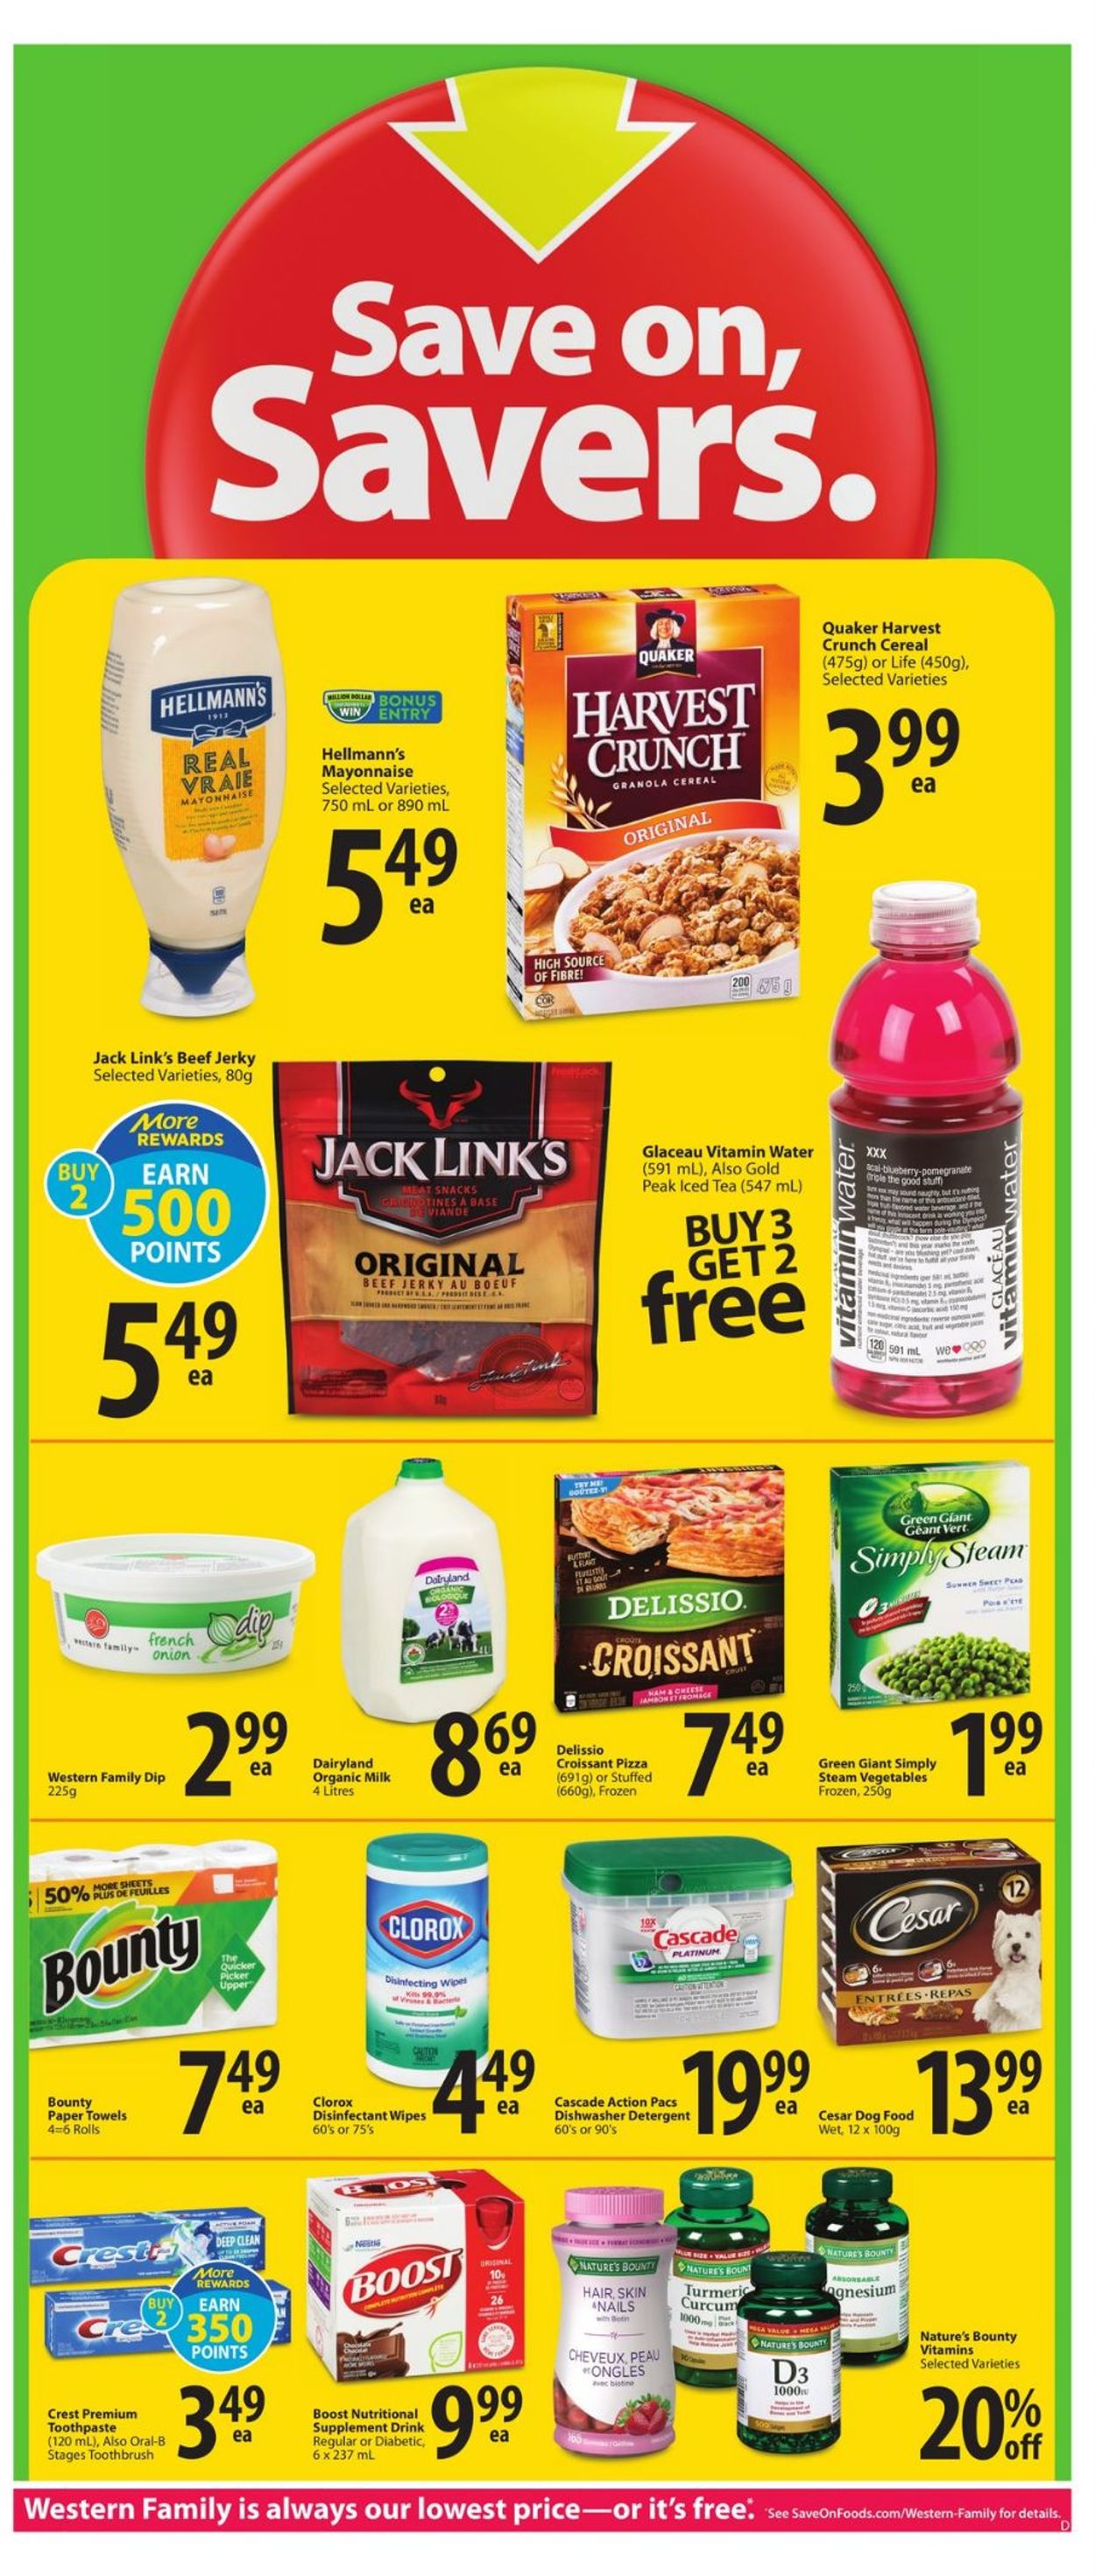 Save-On-Foods Flyer from 08/04/2022